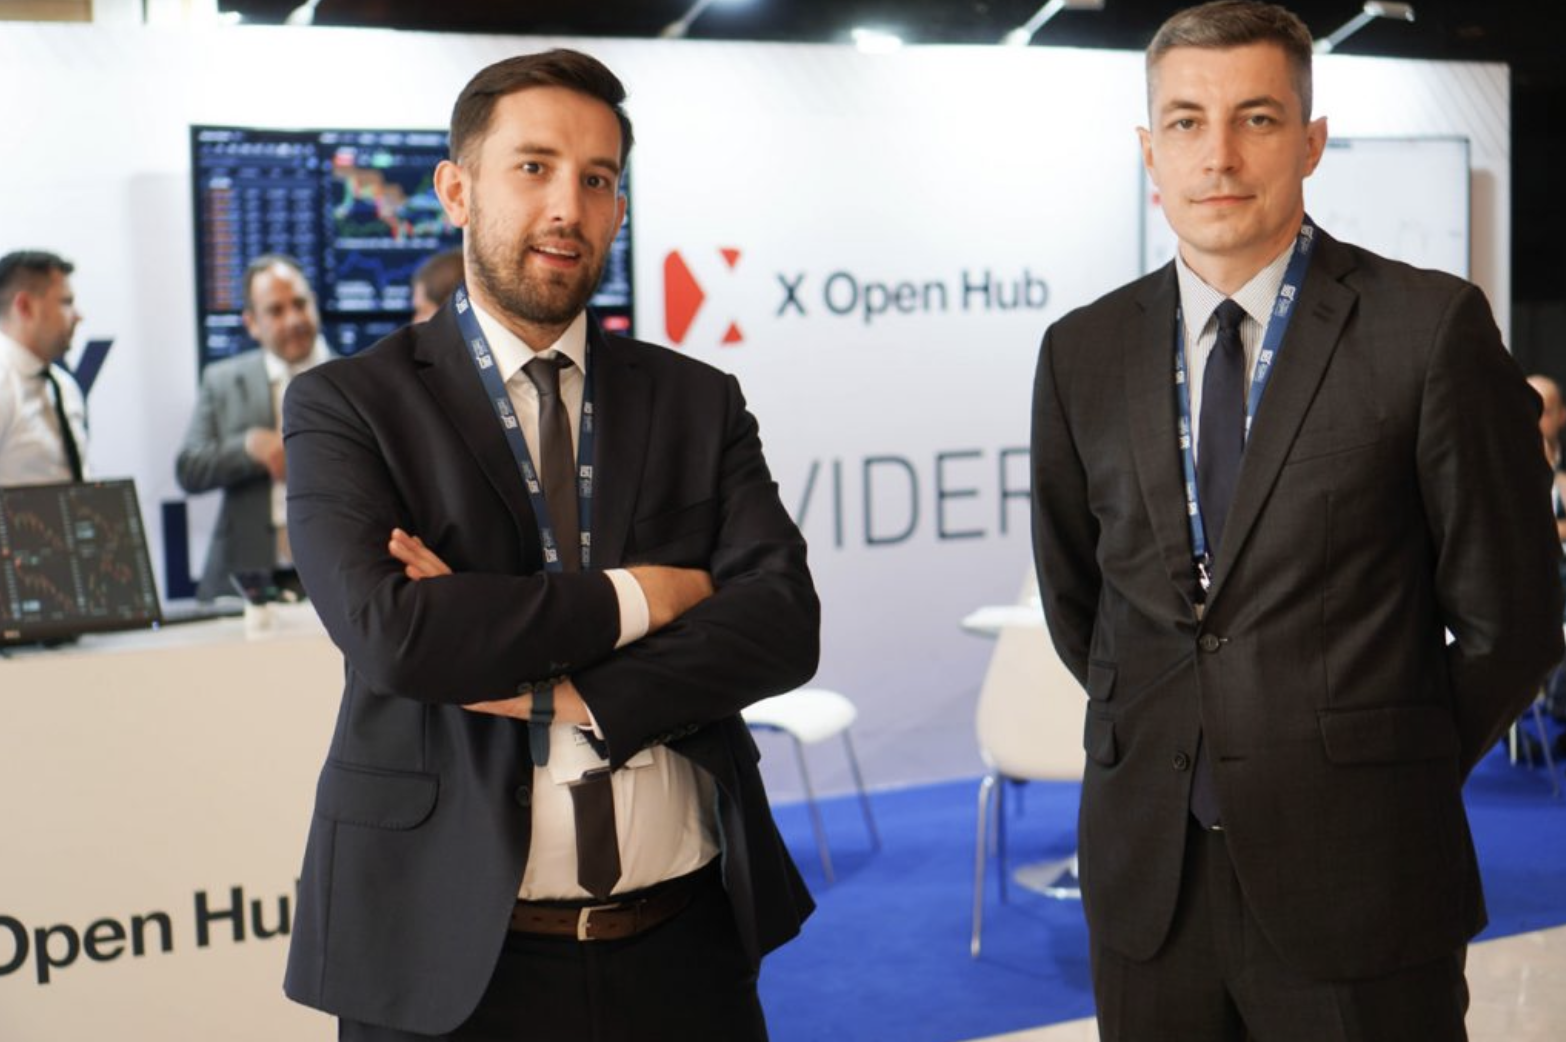 X Open Hub Adds 30 New Cryptocurrencies and 2 Emerging Market Indices to its Vast Asset List